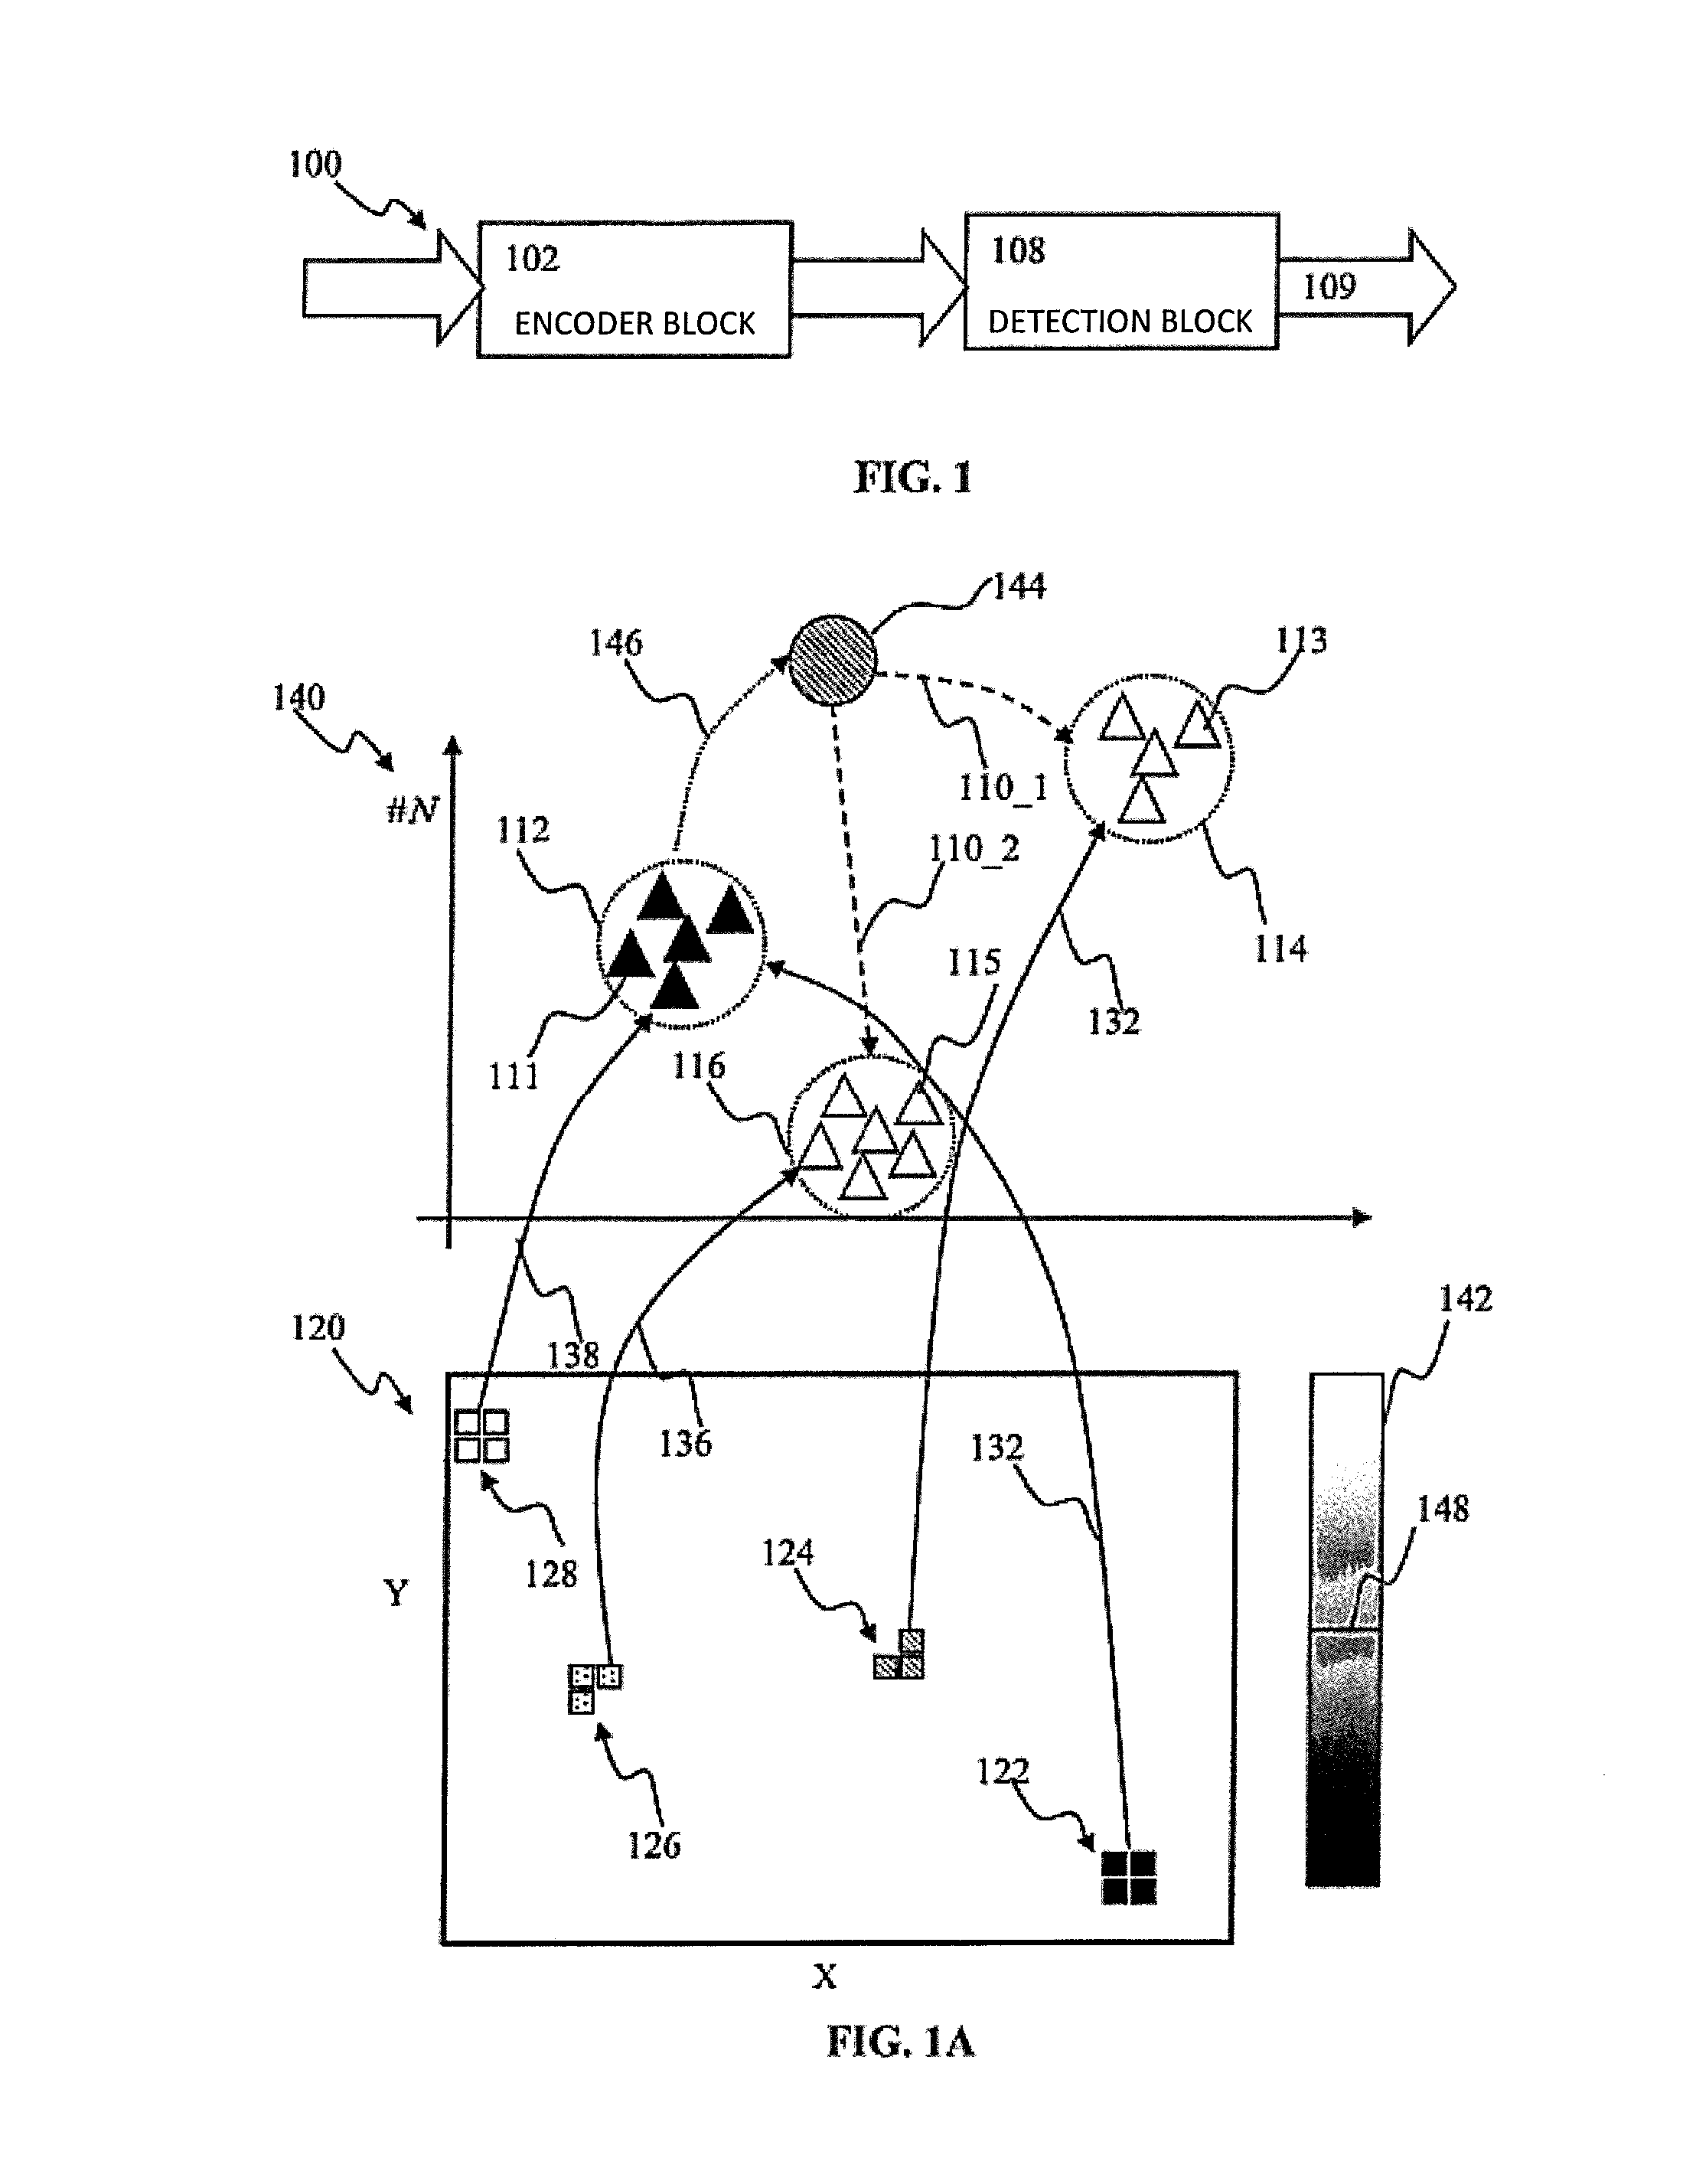 Contrast enhancement spiking neuron network sensory processing apparatus and methods